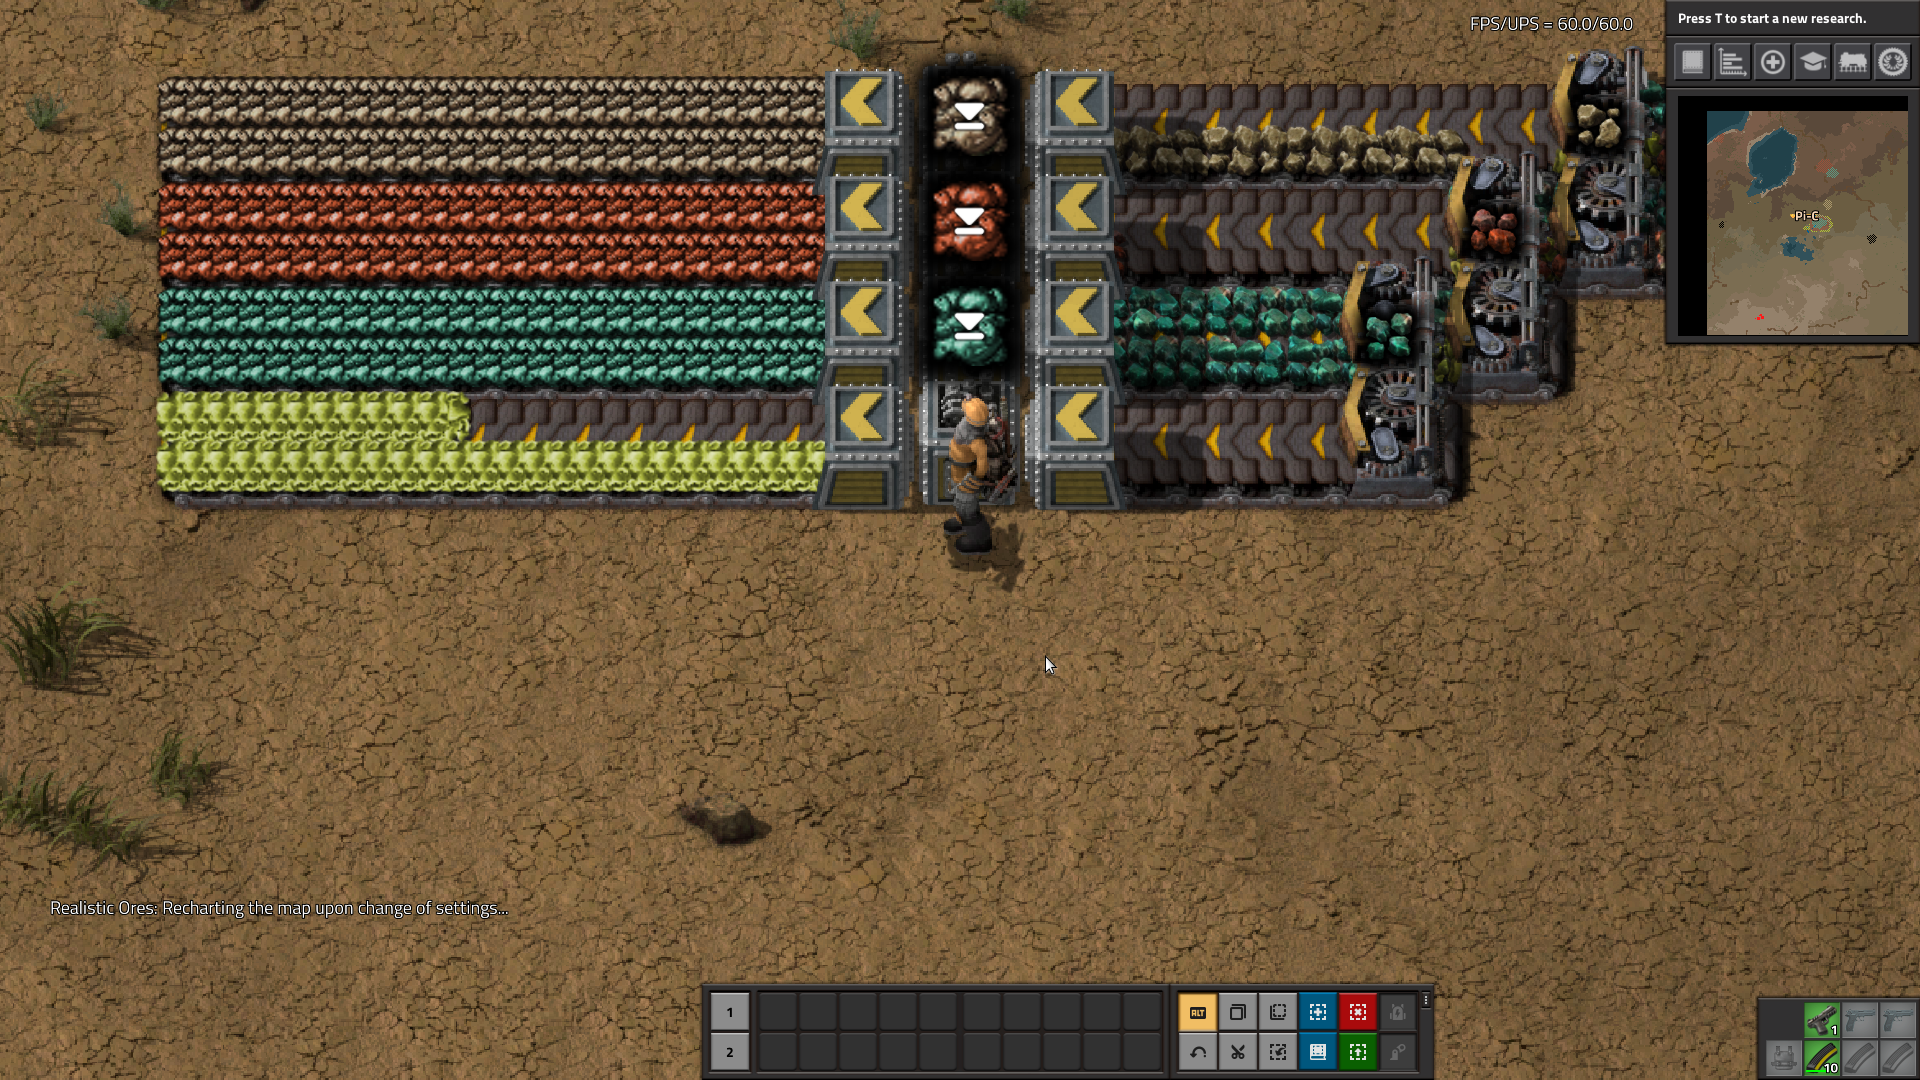 Your mod is active and ore can go through all belts.